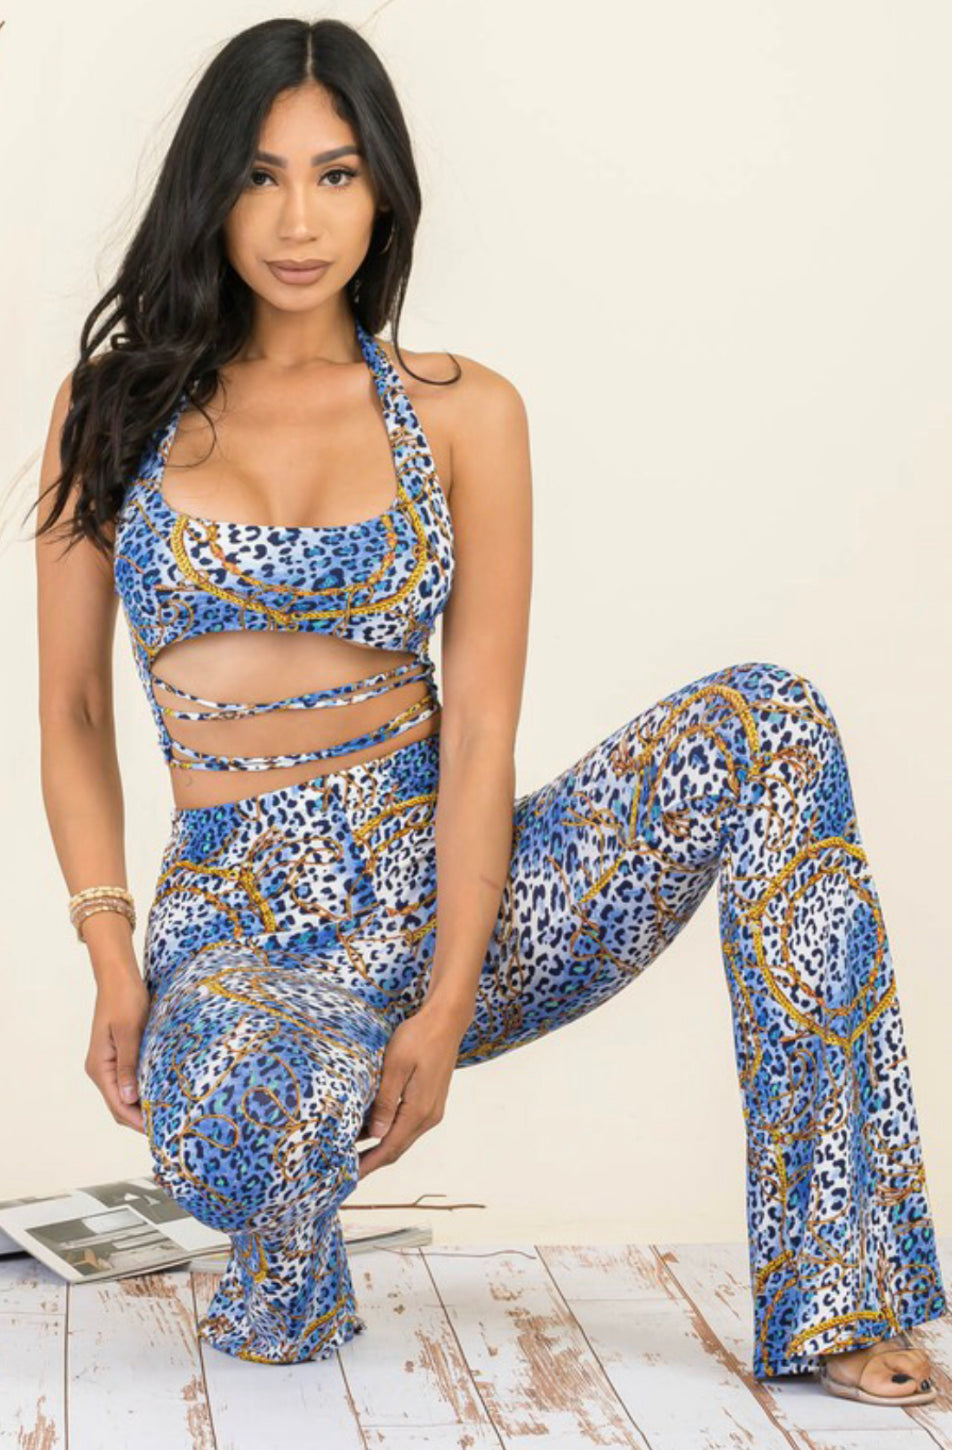 Halter top with waist detail flare pants set